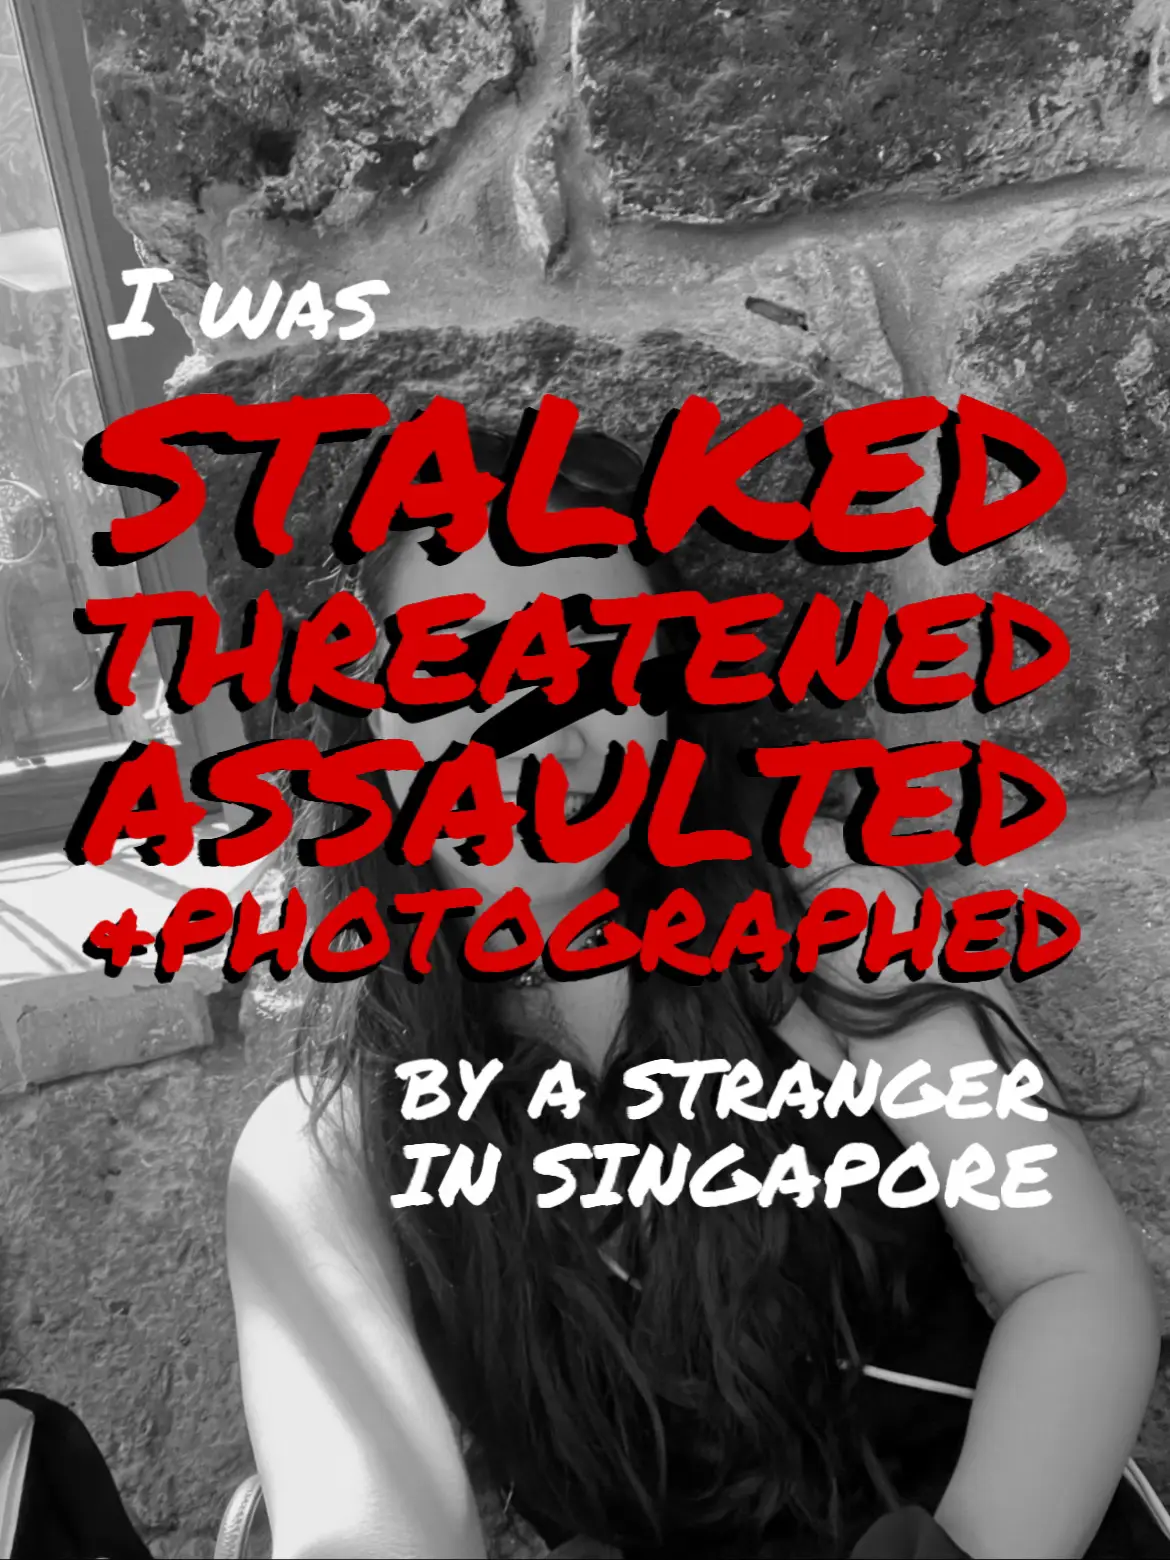 I was stalked & assaulted by a stranger in sg's images(0)